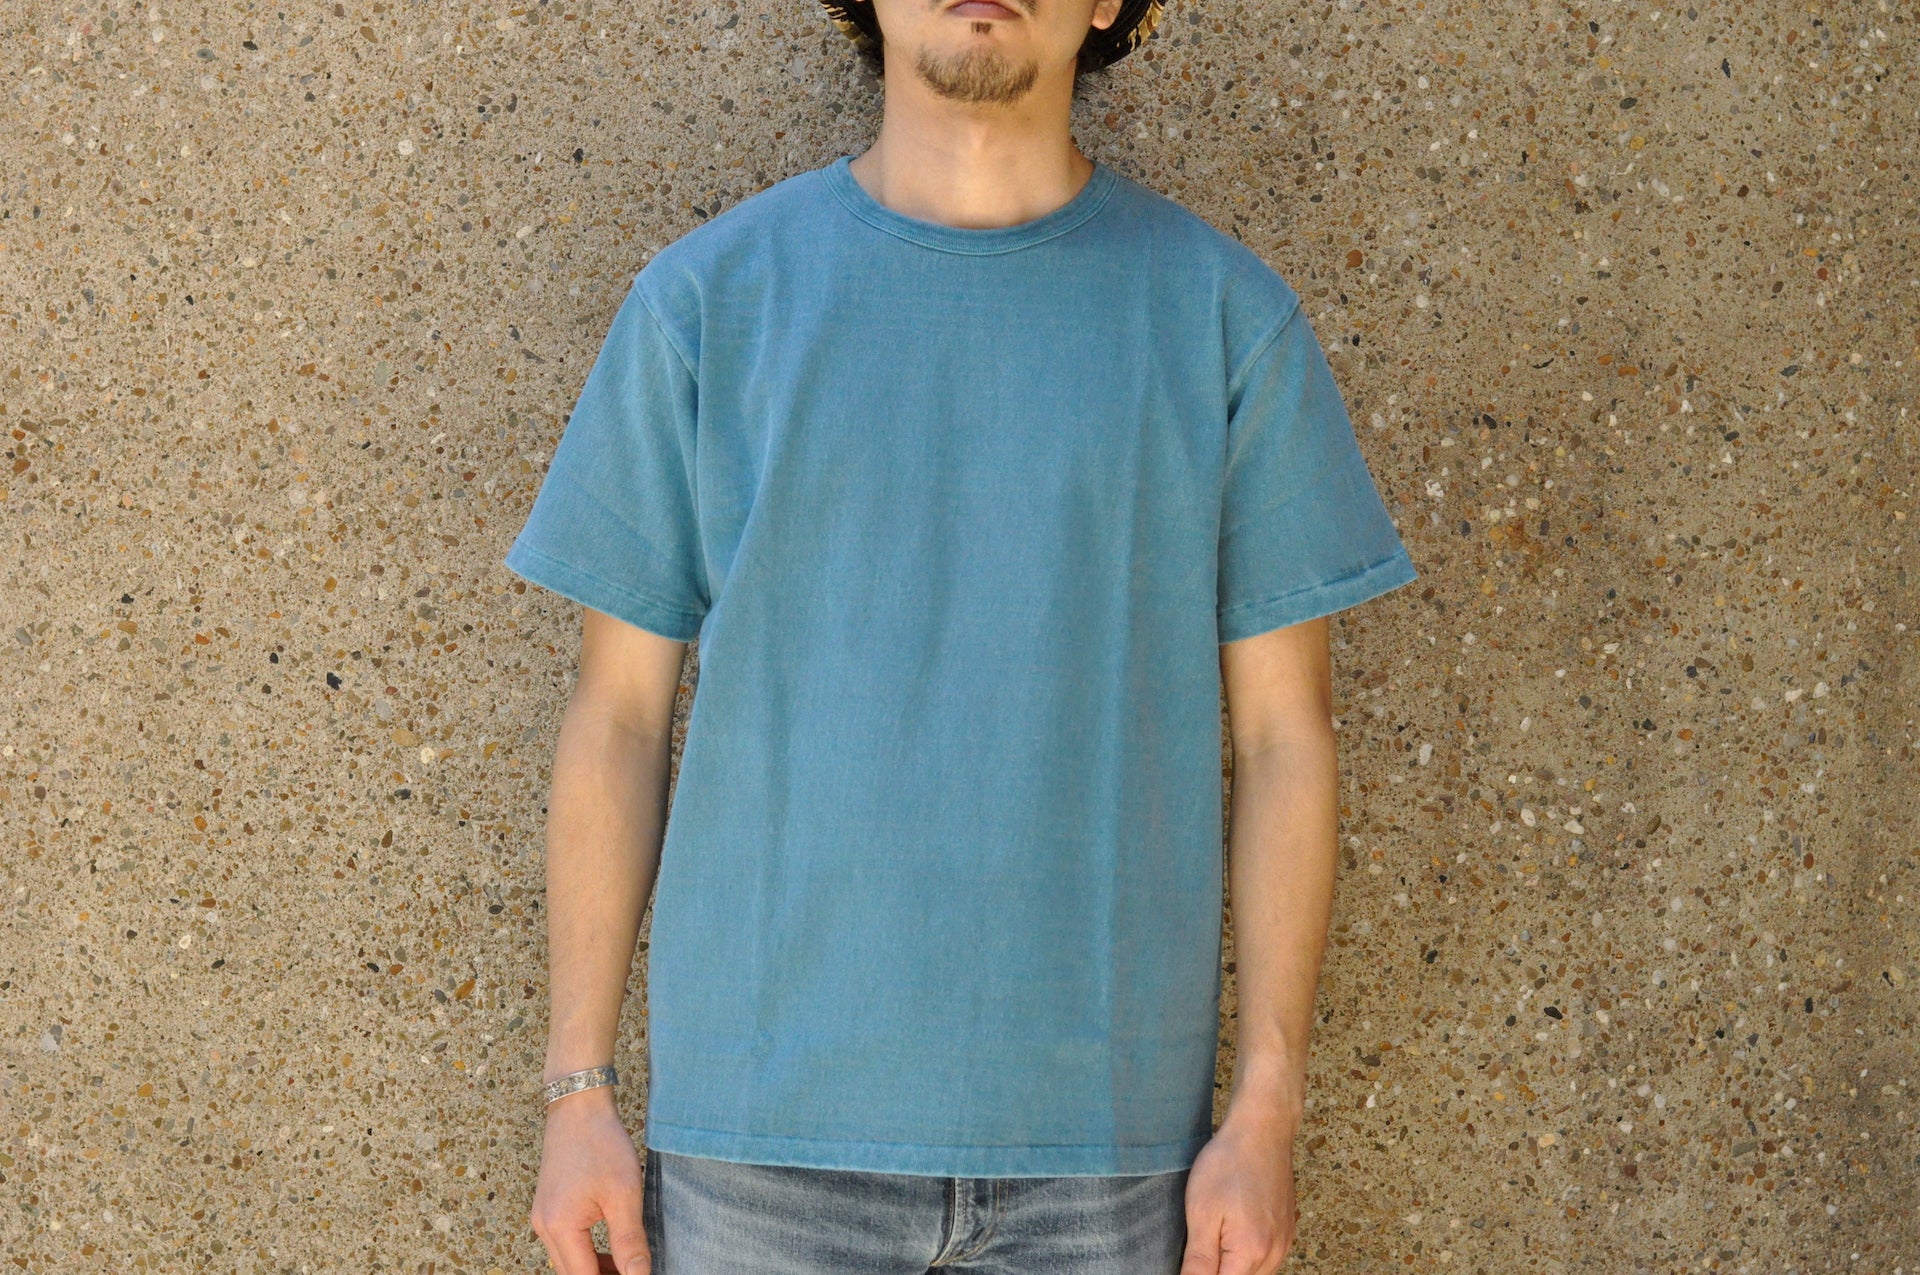 Dubble Works 9oz "Ultra-Heavy" Pigment Dyed Loopwheeled Tee (Turquoise)